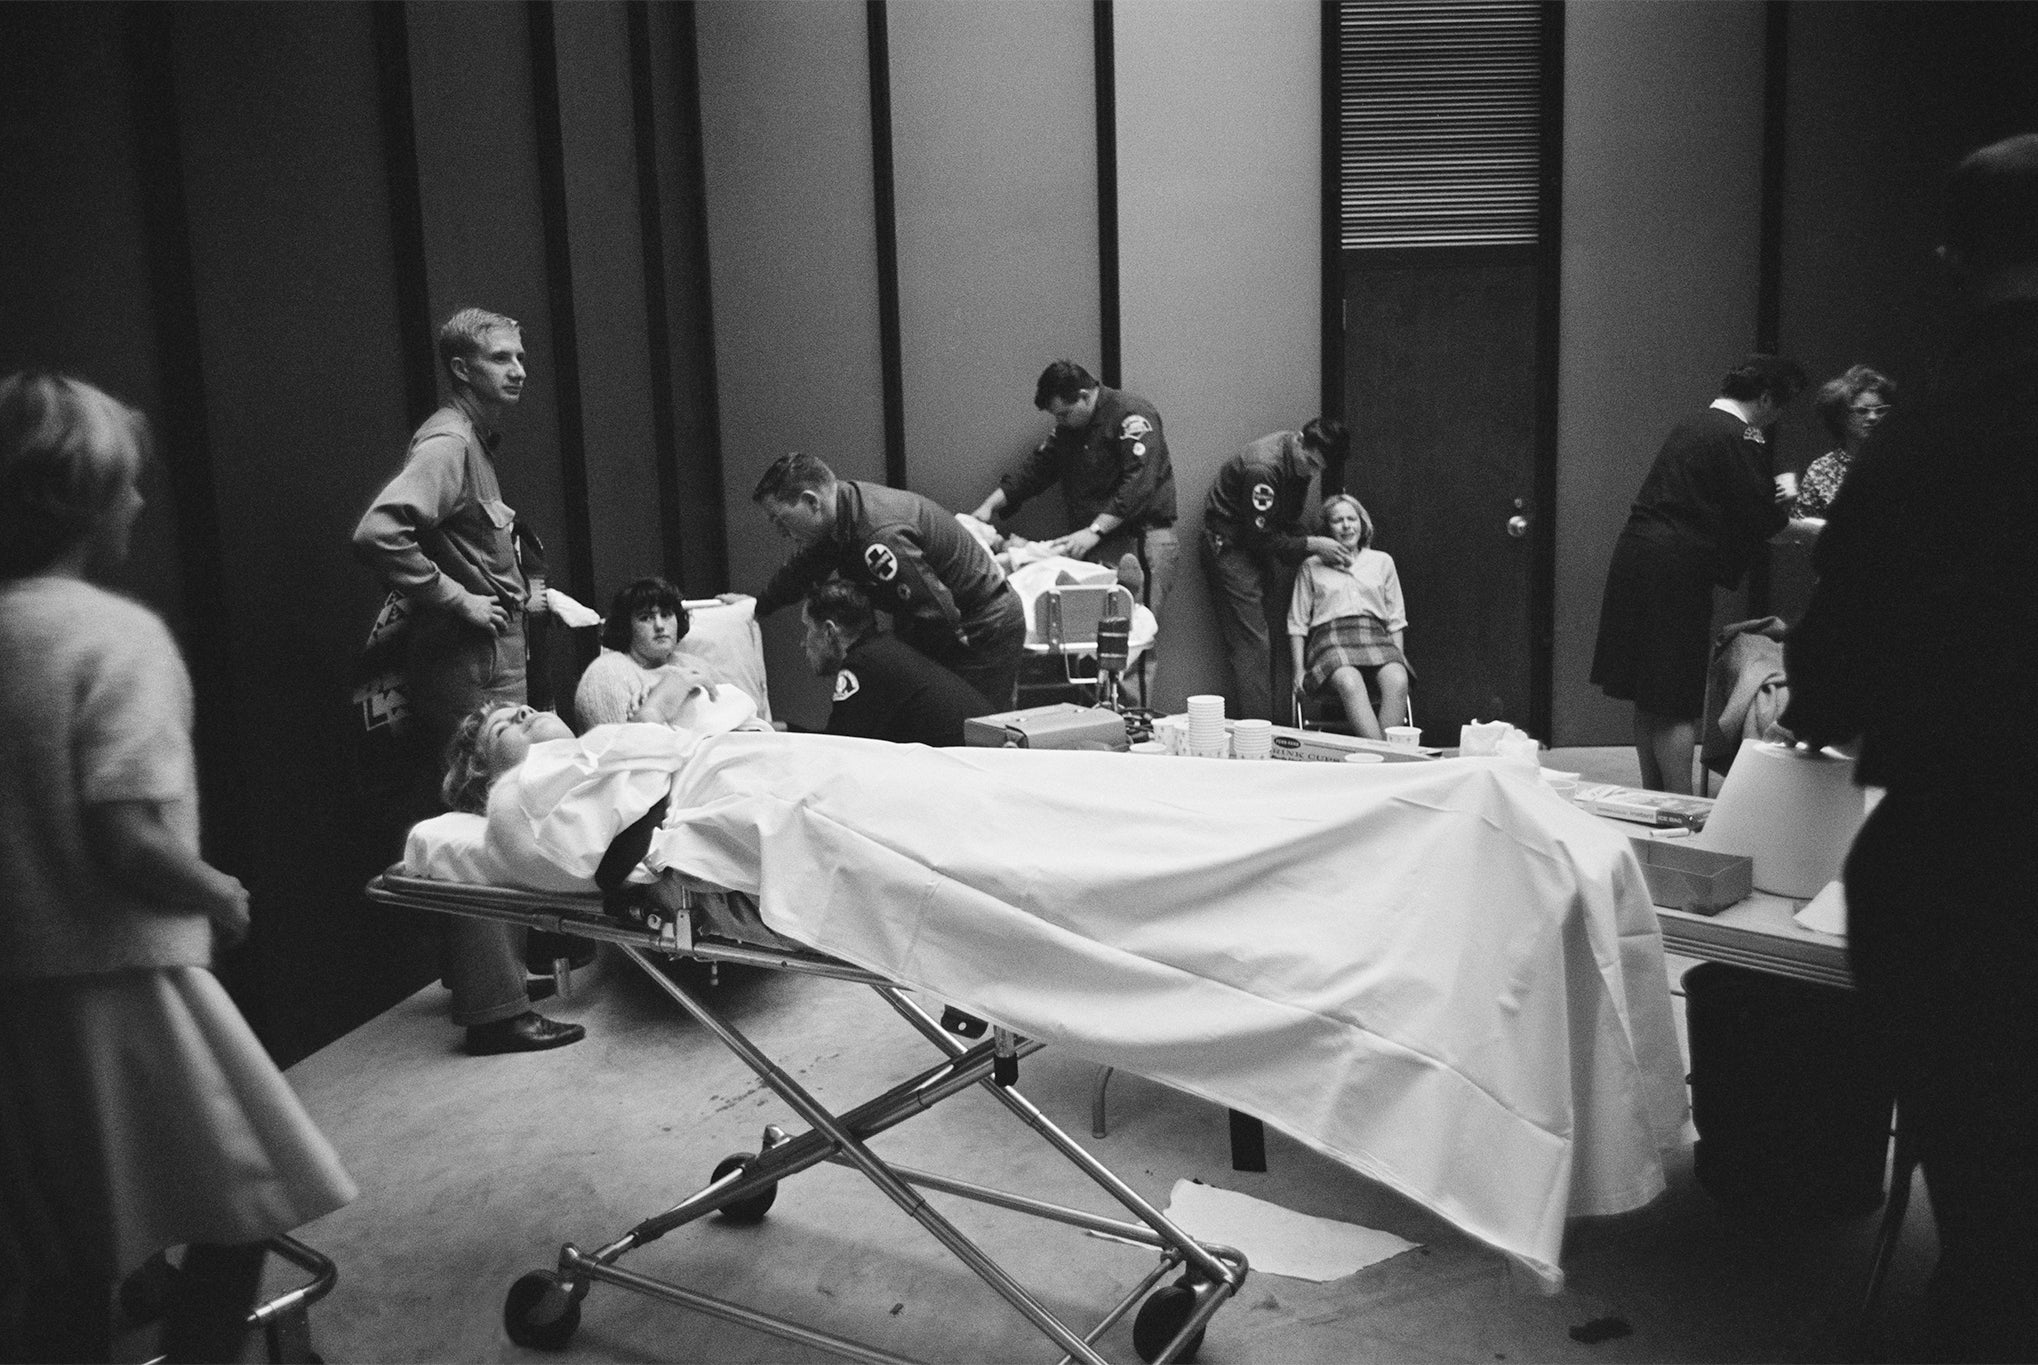 Beatles fans are attended to by paramedics, having been overcome during the group’s US tour, August 1964